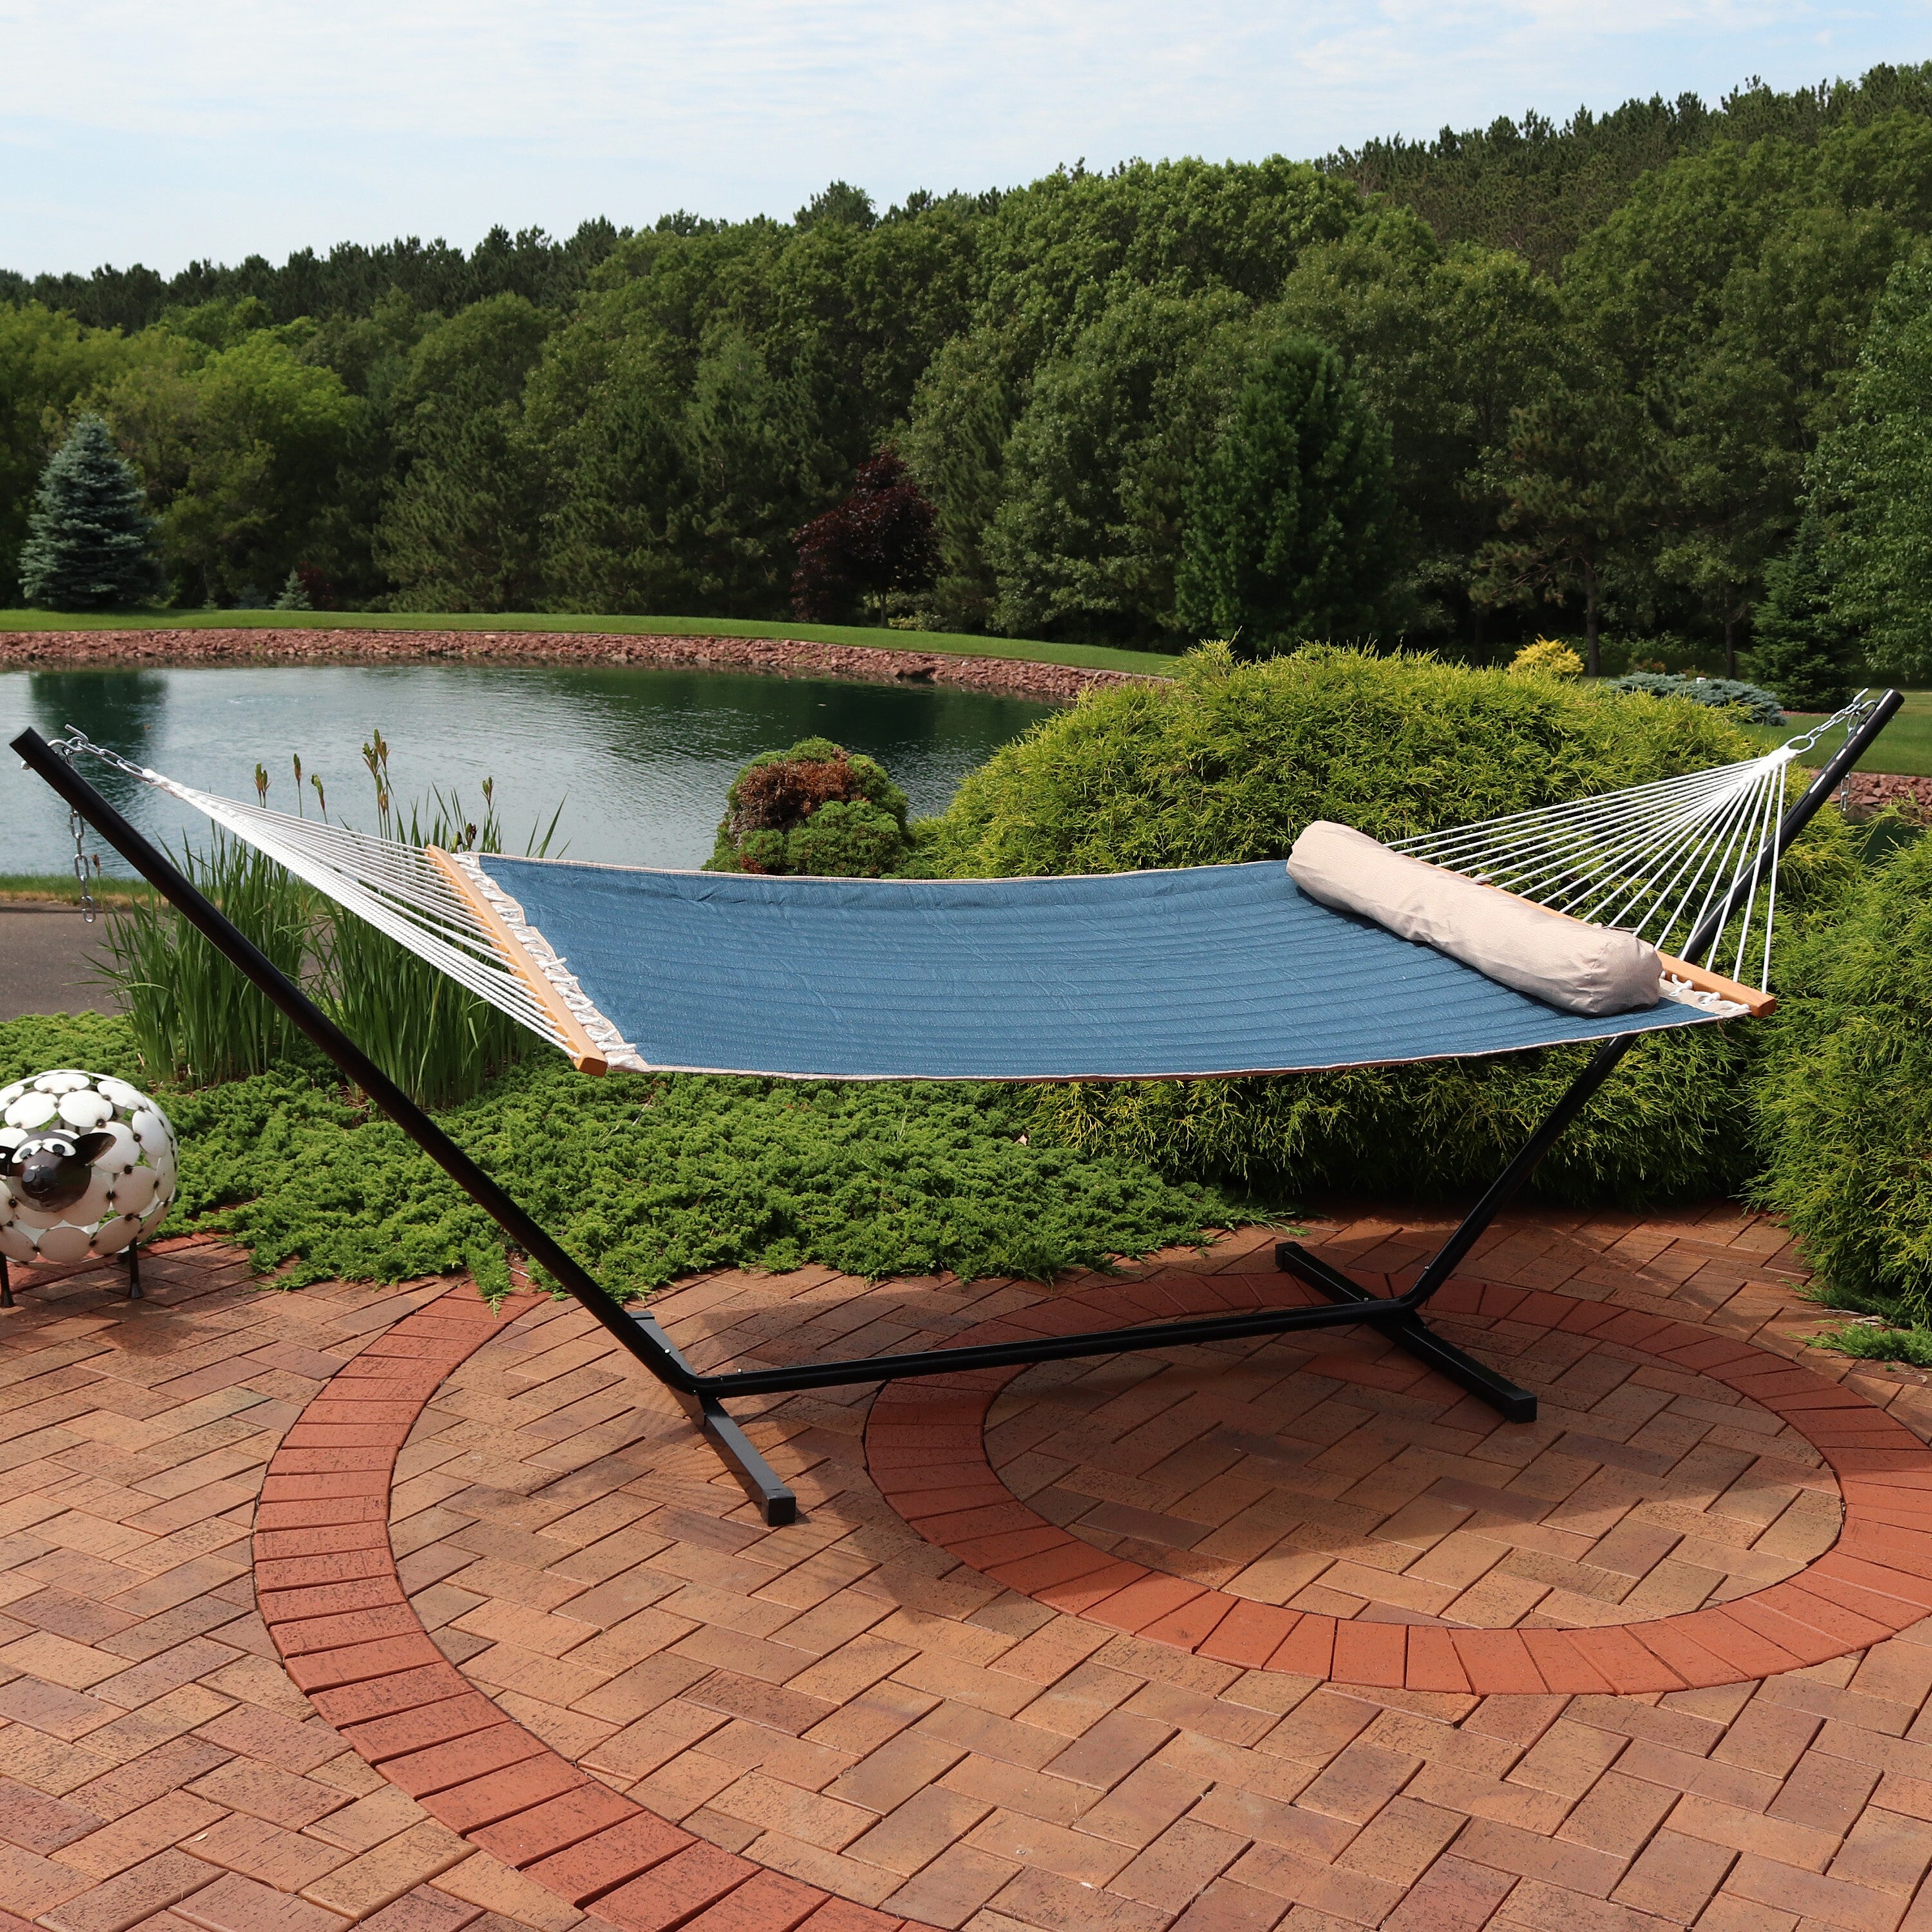 Sunnydaze Decor Tidal Wave Fabric Hammock with Stand in the